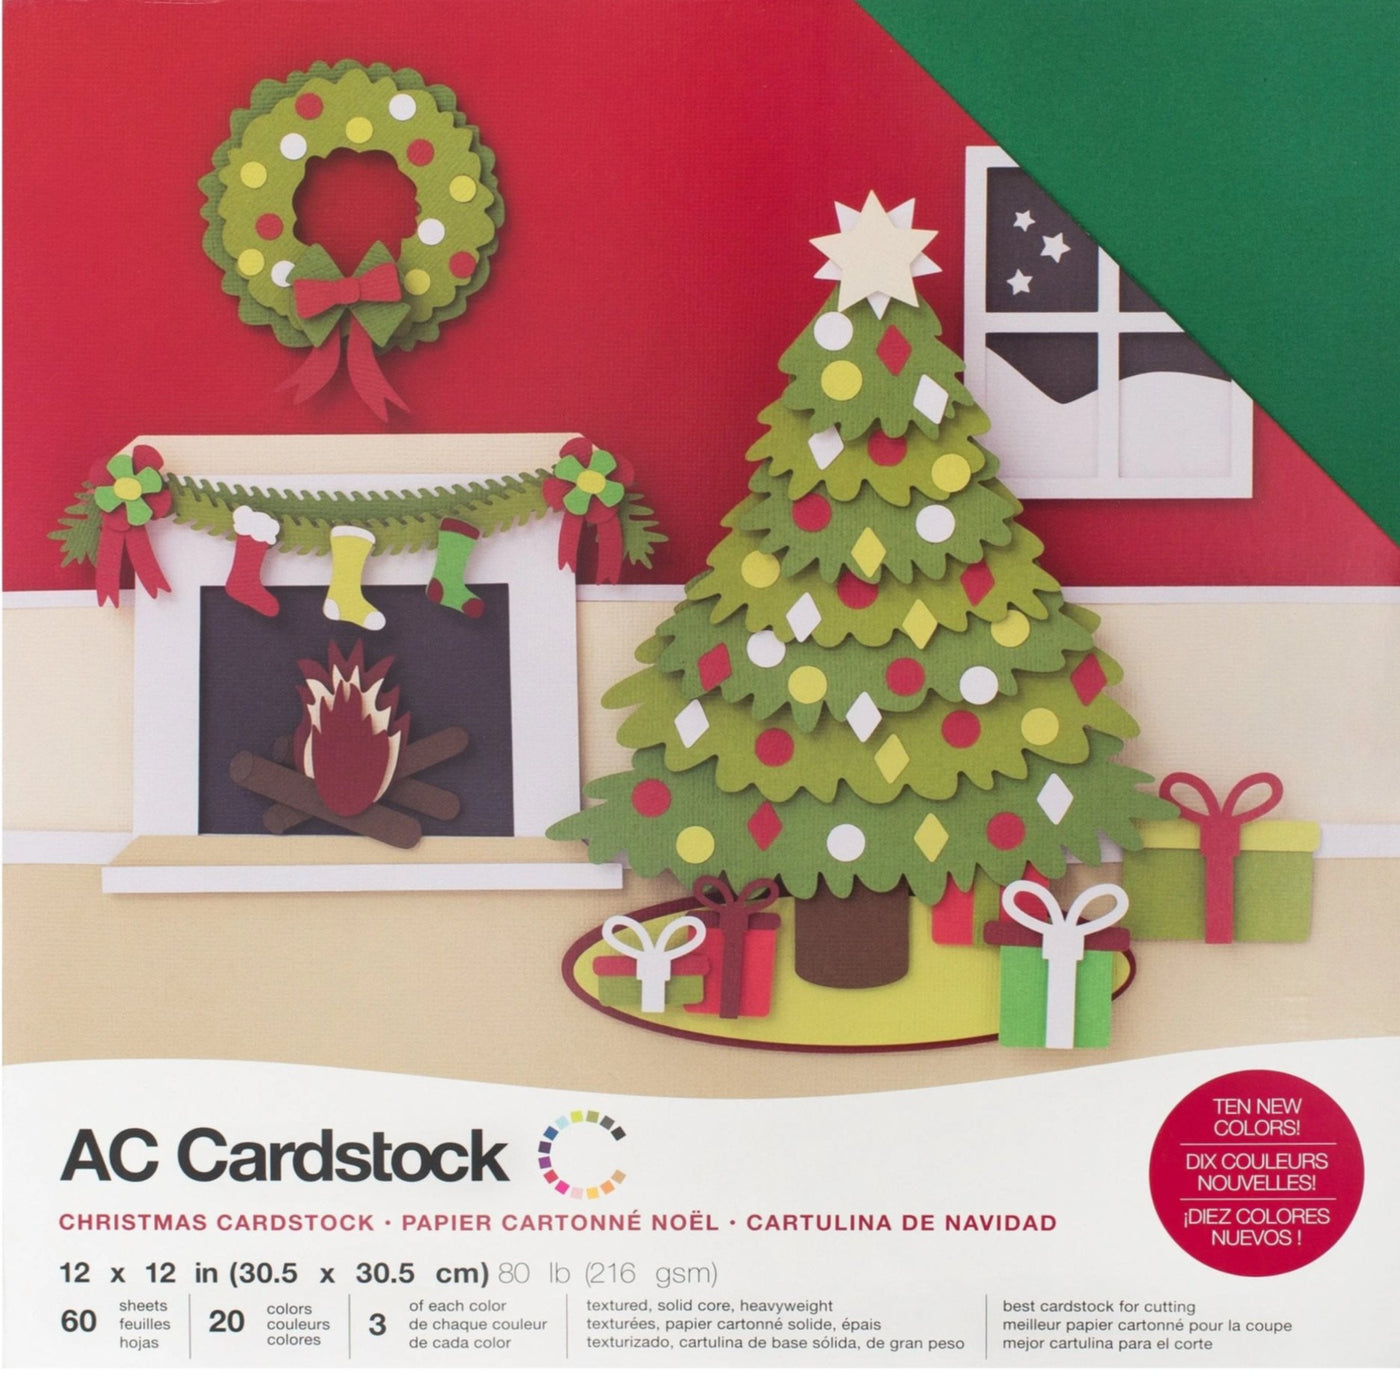 Christmas Cardstock Variety Pack - 60 ct - 12x12 inch - 80 lb - textured cardstock-American Crafts scrapbook paper